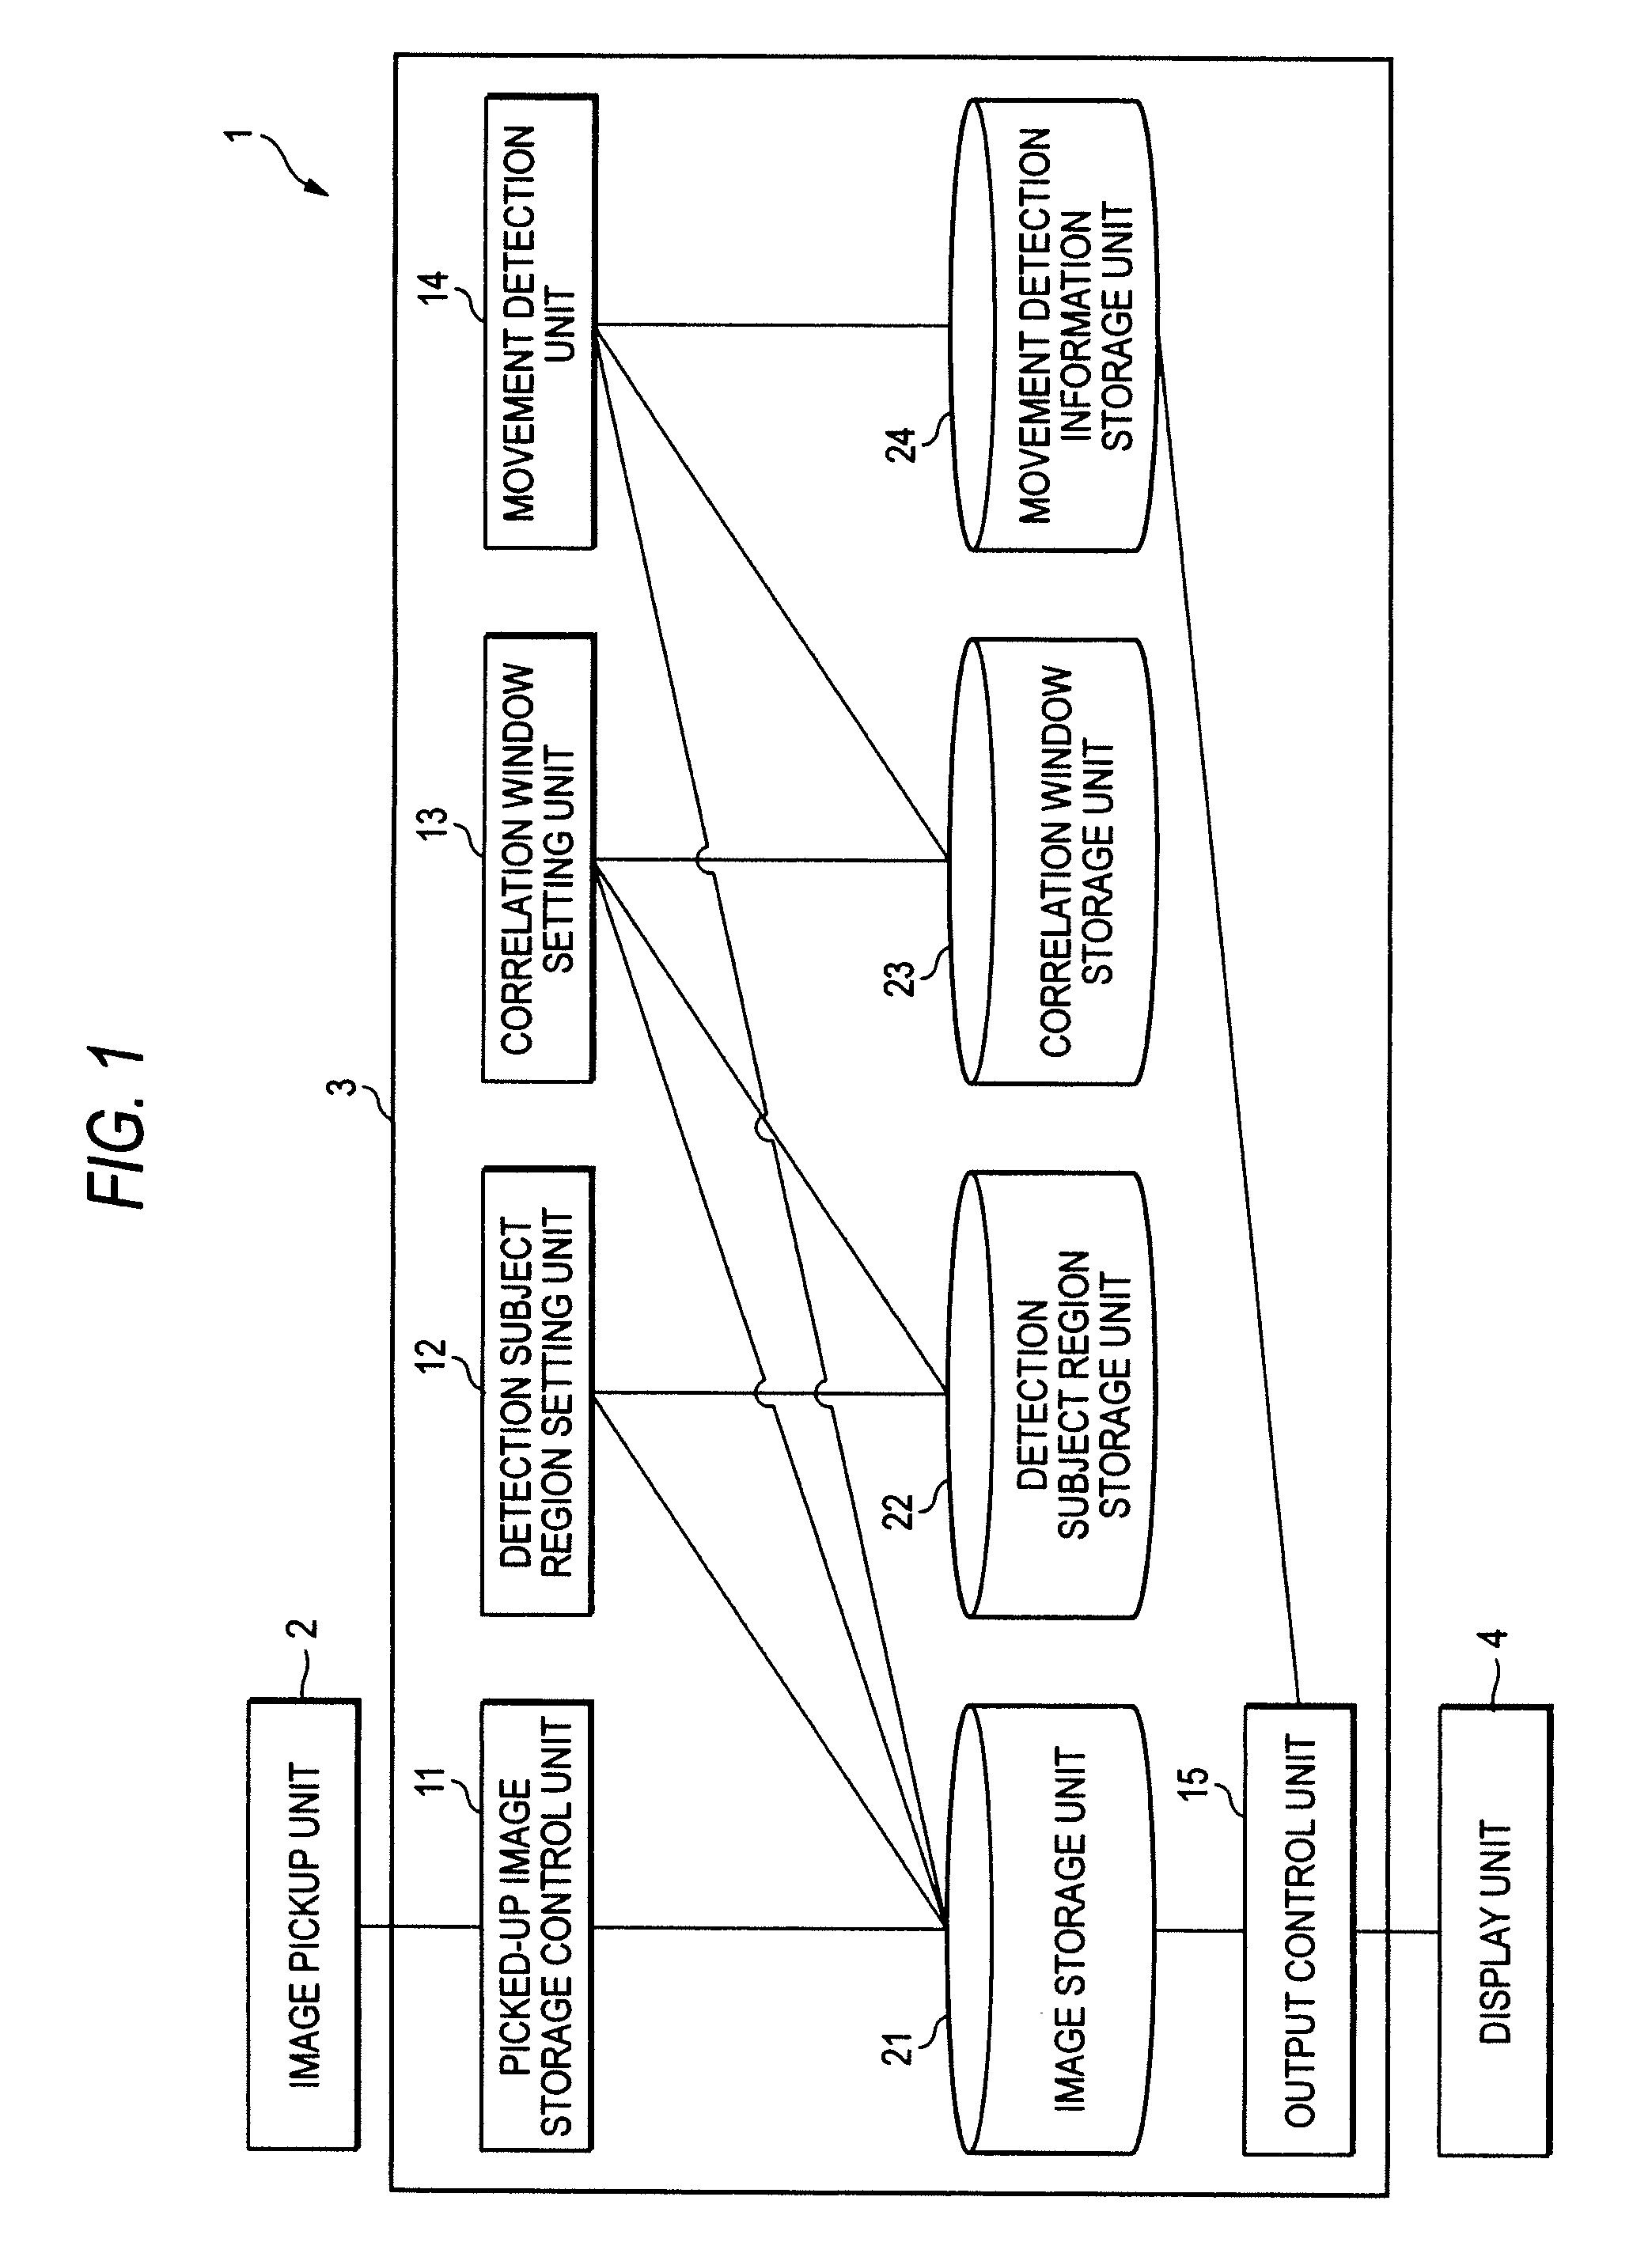 Image processing apparatus, image processing method, image processing program, recording medium recording the image processing program, and moving object detection system